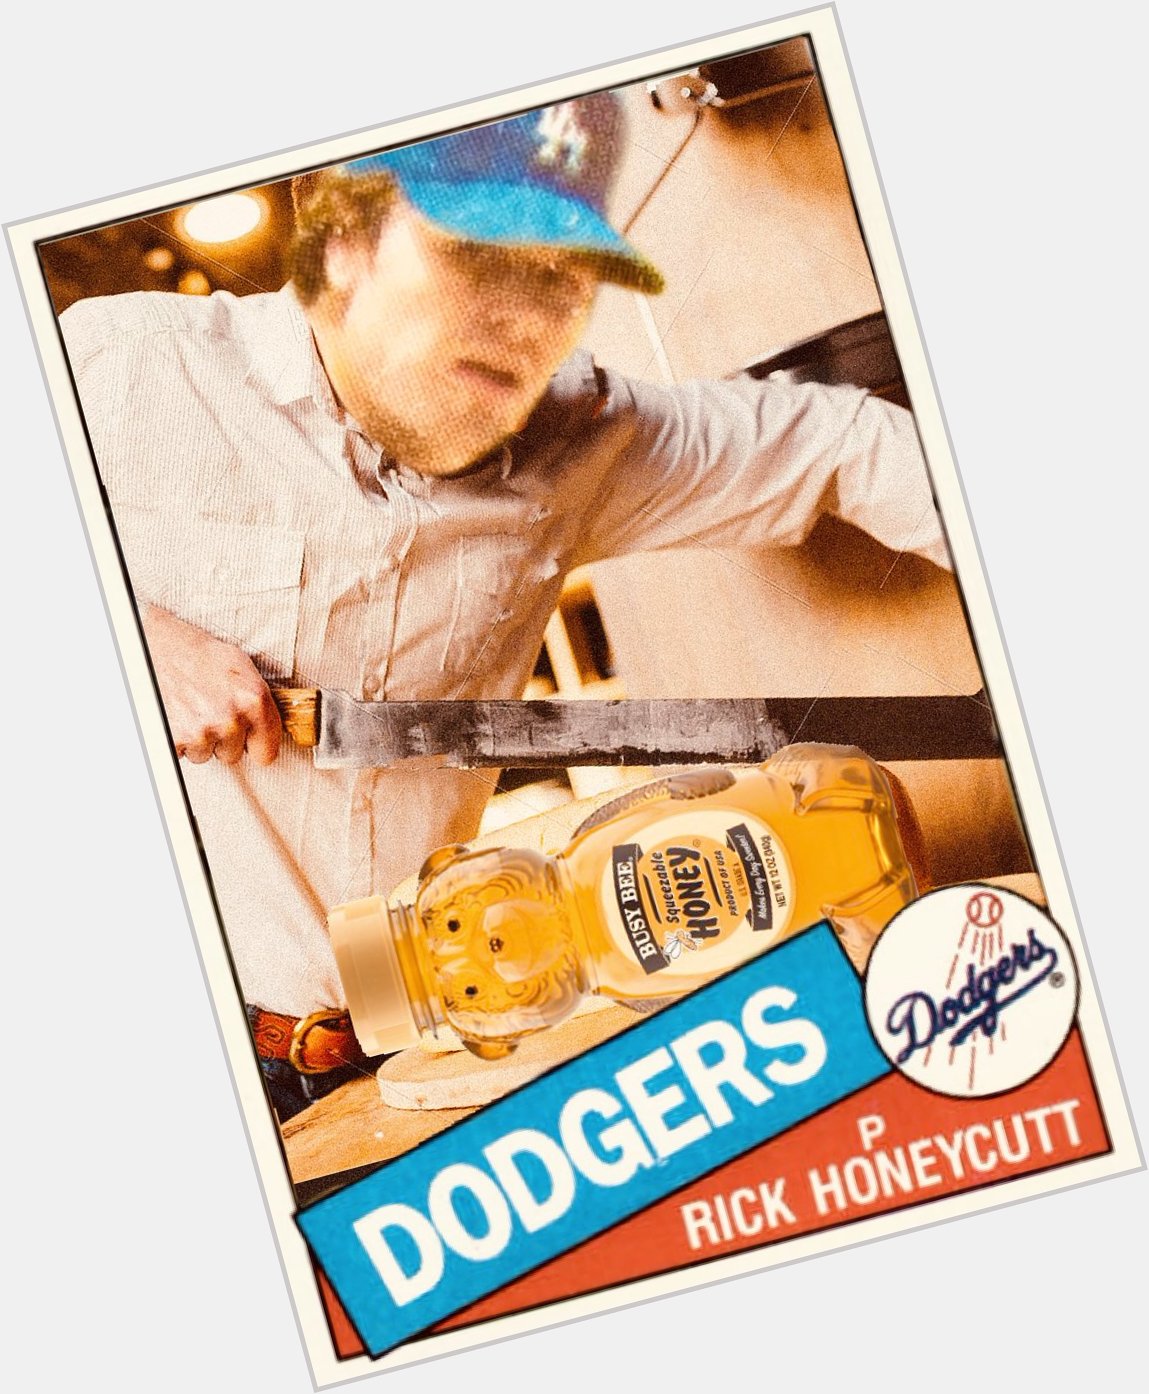 What\s the buzz, tell me what\s a-happening?

Happy birthday to Rick Honeycutt! 